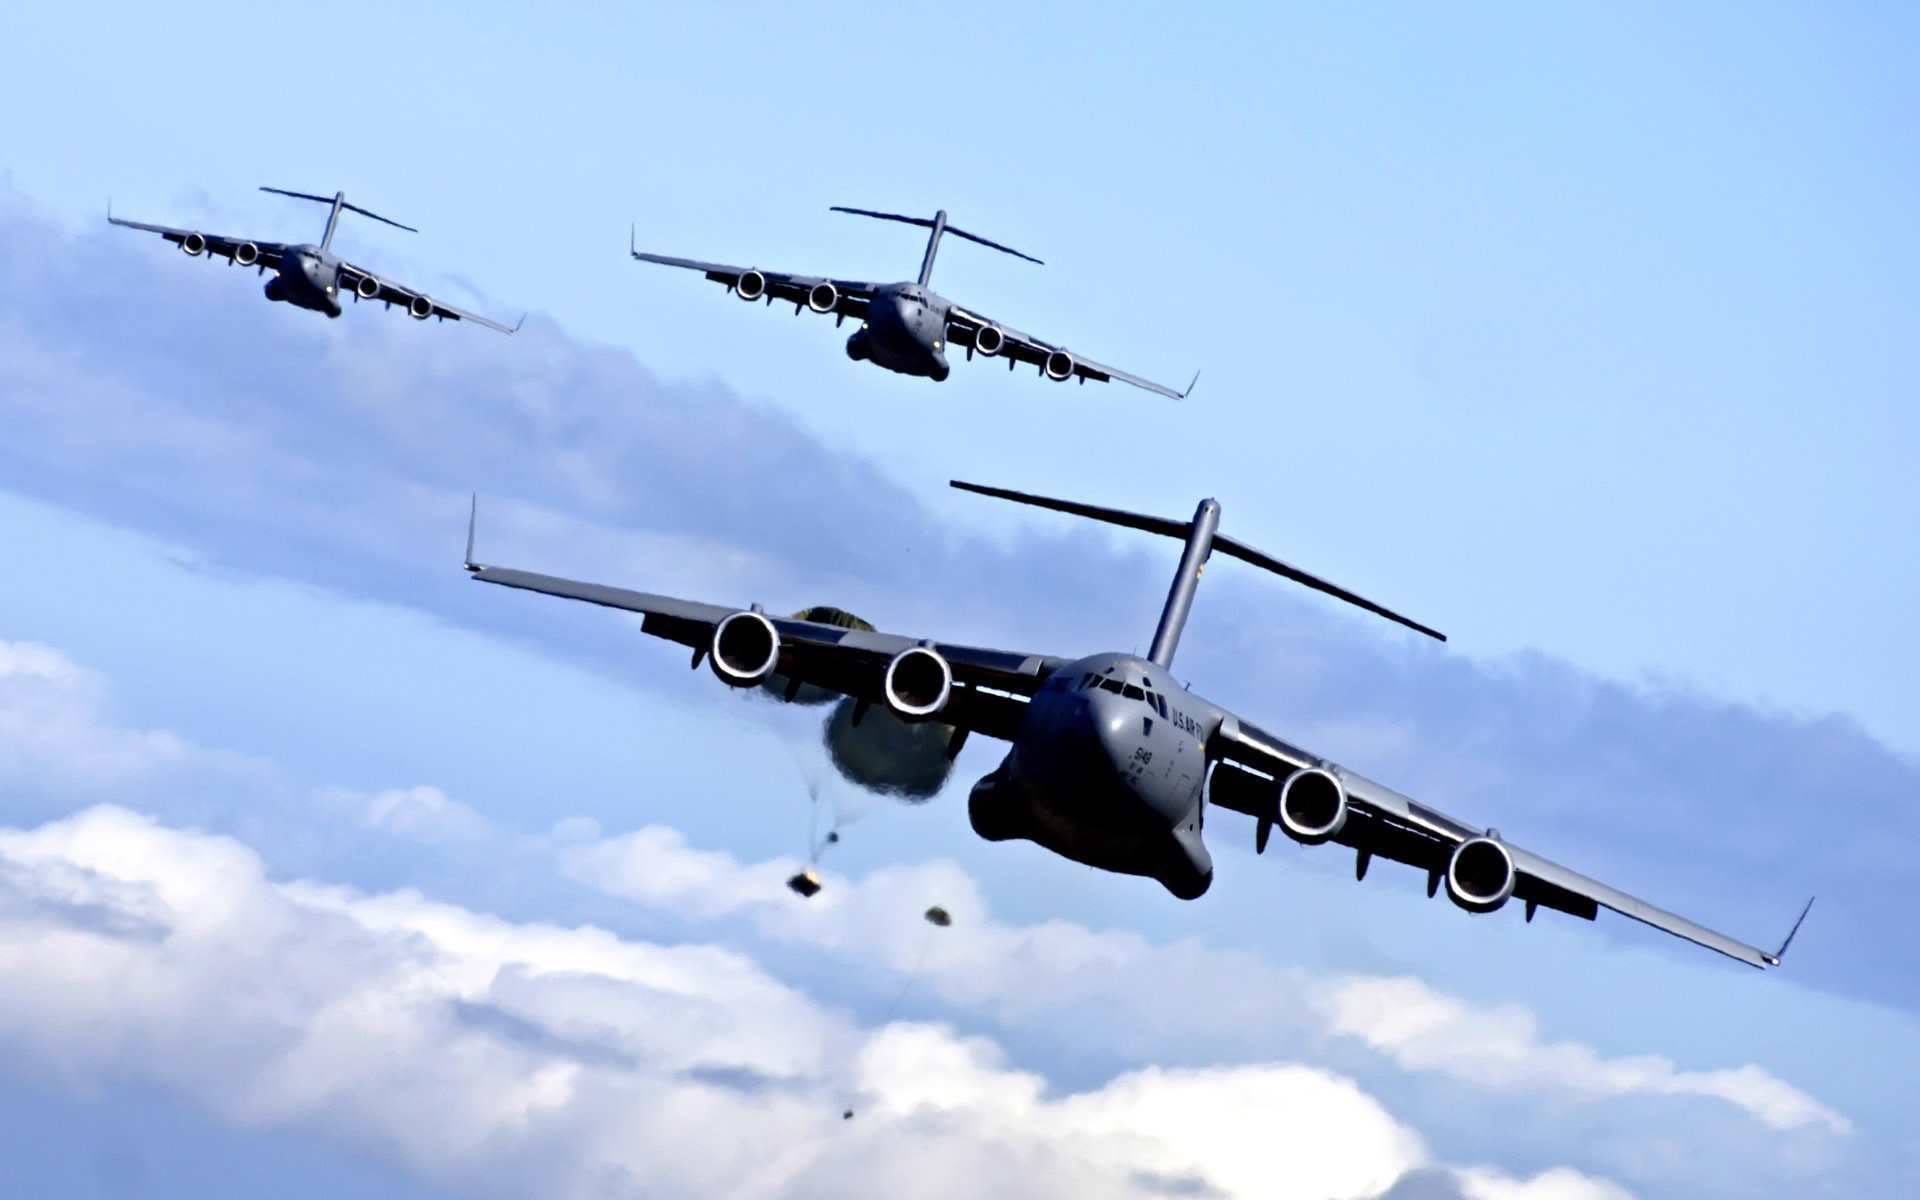 General 1920x1200 military aircraft vehicle military aircraft Boeing C-17 Globemaster III US Air Force Boeing American aircraft sky clouds military vehicle frontal view flying